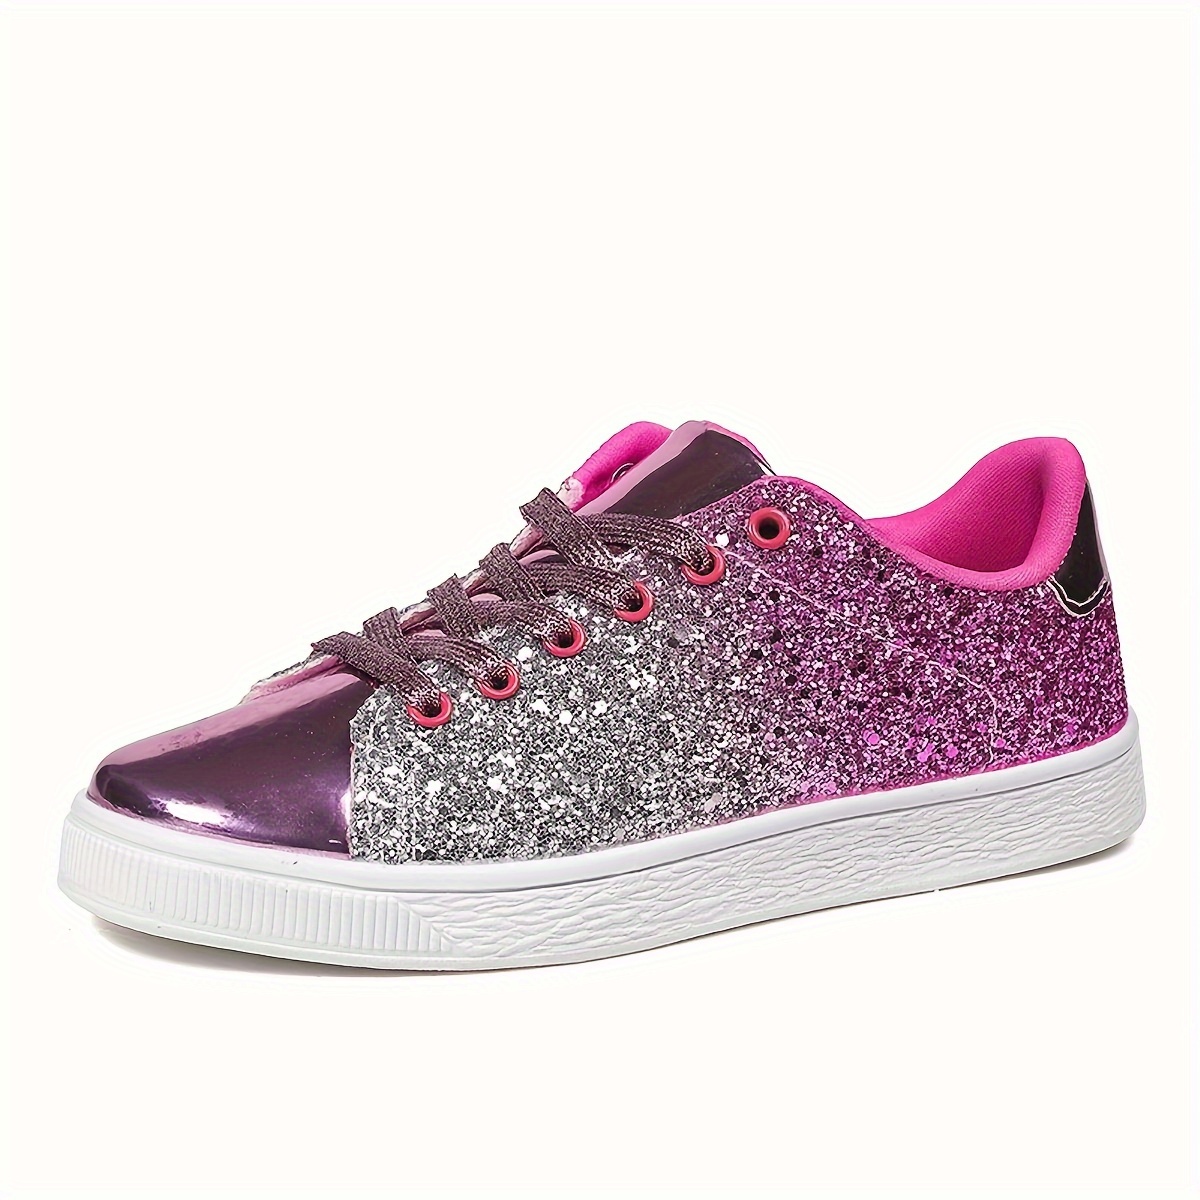 Jeekopeg Glitter Sparkly Fashion Sneakers Shoes Shiny Casual Shoes Bling  Sequin Concert Low Cut Lace up Shoes